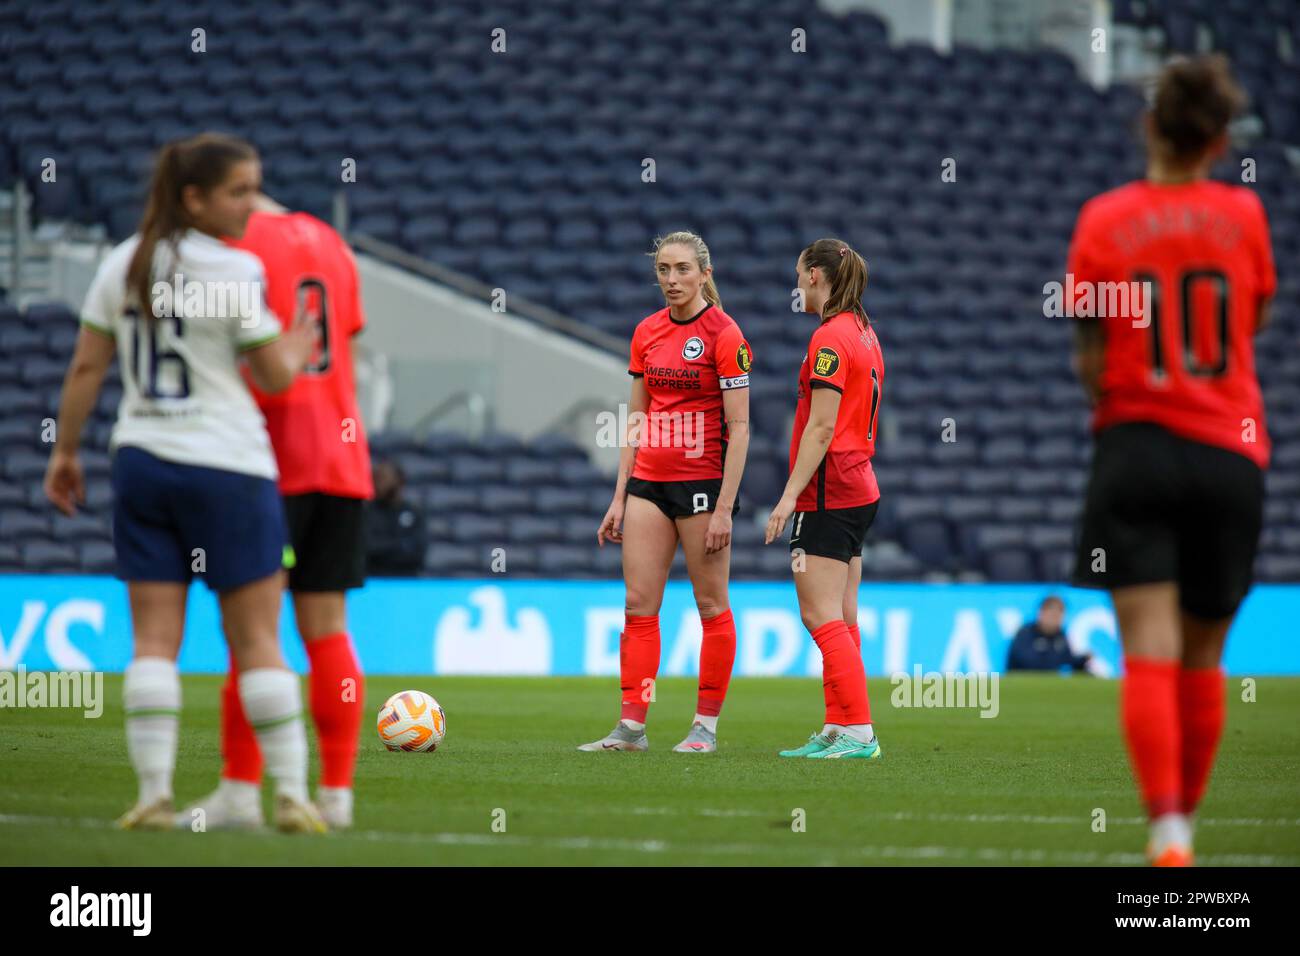 London, UK. 29th Apr, 2023. London, England, April 29 2023: Megan Connolly (8 Brighton & Hove Albion) prepares to take a free kick during the FA Womens Super League game between Tottenham Hotspur and Brighton & Hove Albion in London, England. (Alexander Canillas/SPP) Credit: SPP Sport Press Photo. /Alamy Live News Stock Photo